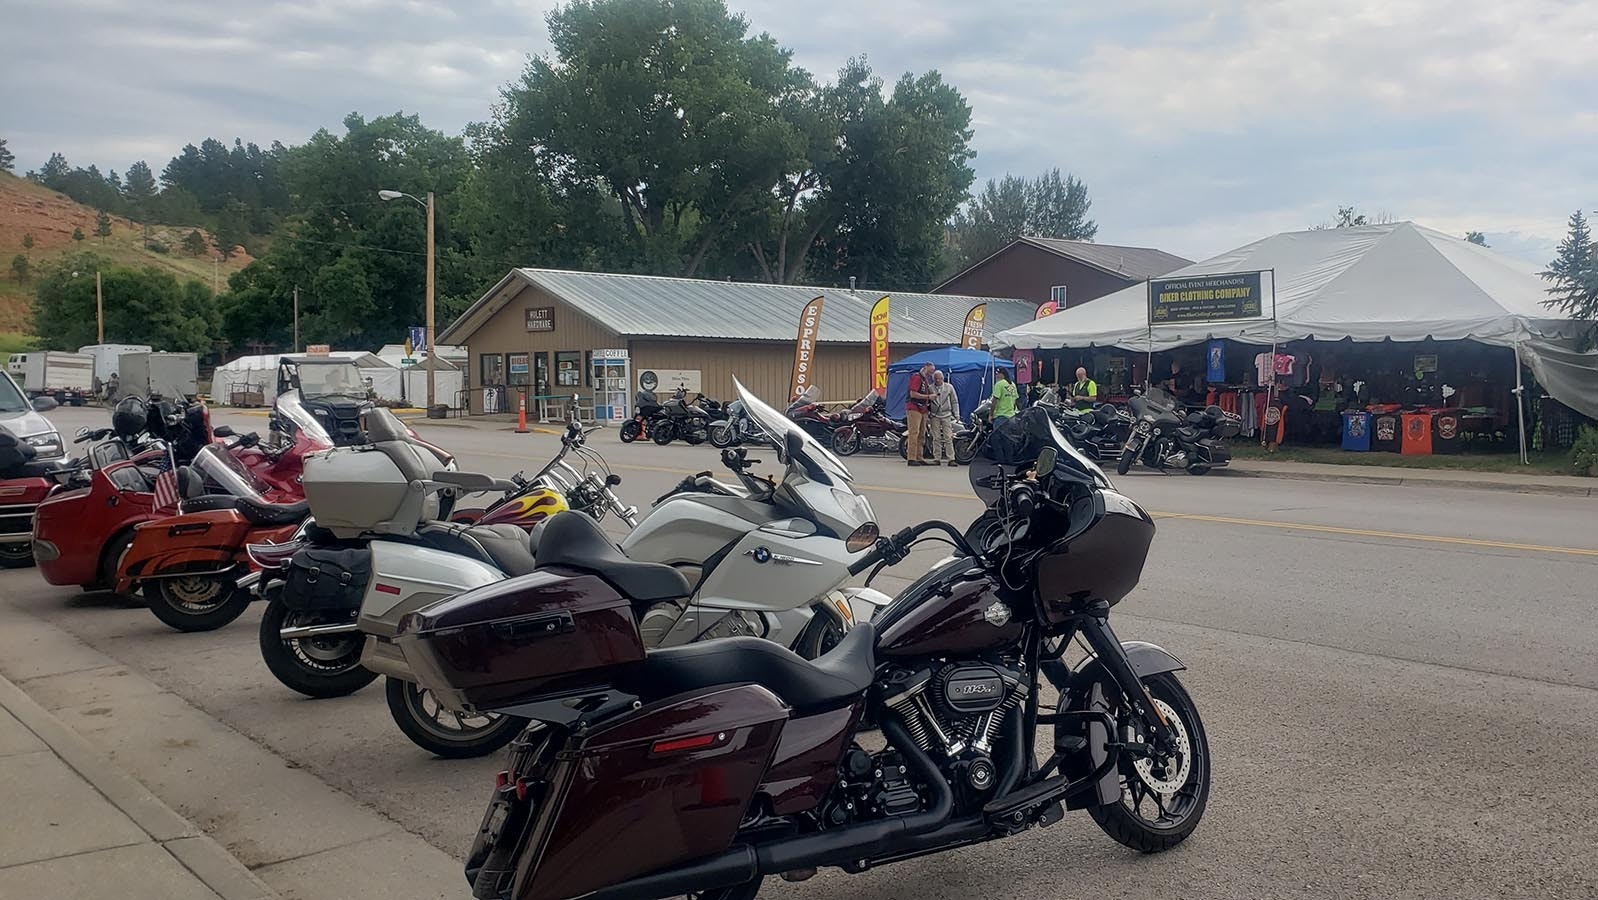 Bikes are already showing up in Hulett, Wyoming, ahead of the Sturgis Motorcycle Rally along with temporary vendors selling Sturgis memorabilia.